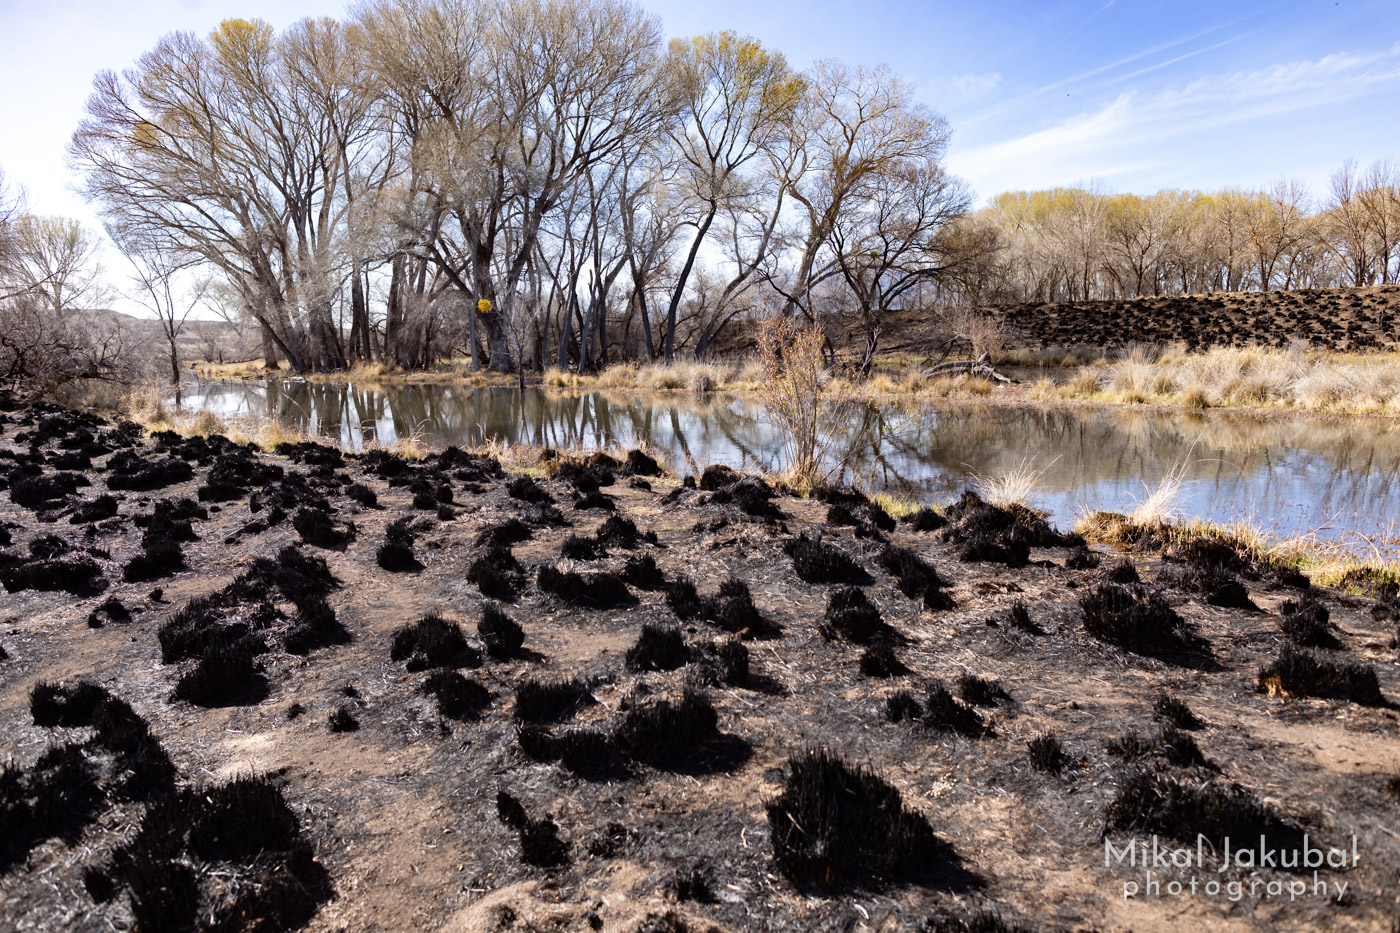 A broad, shallow stream lined with leafless cottonwood trees. In the foreground and across the creek are blackened, burnt grass clumps.